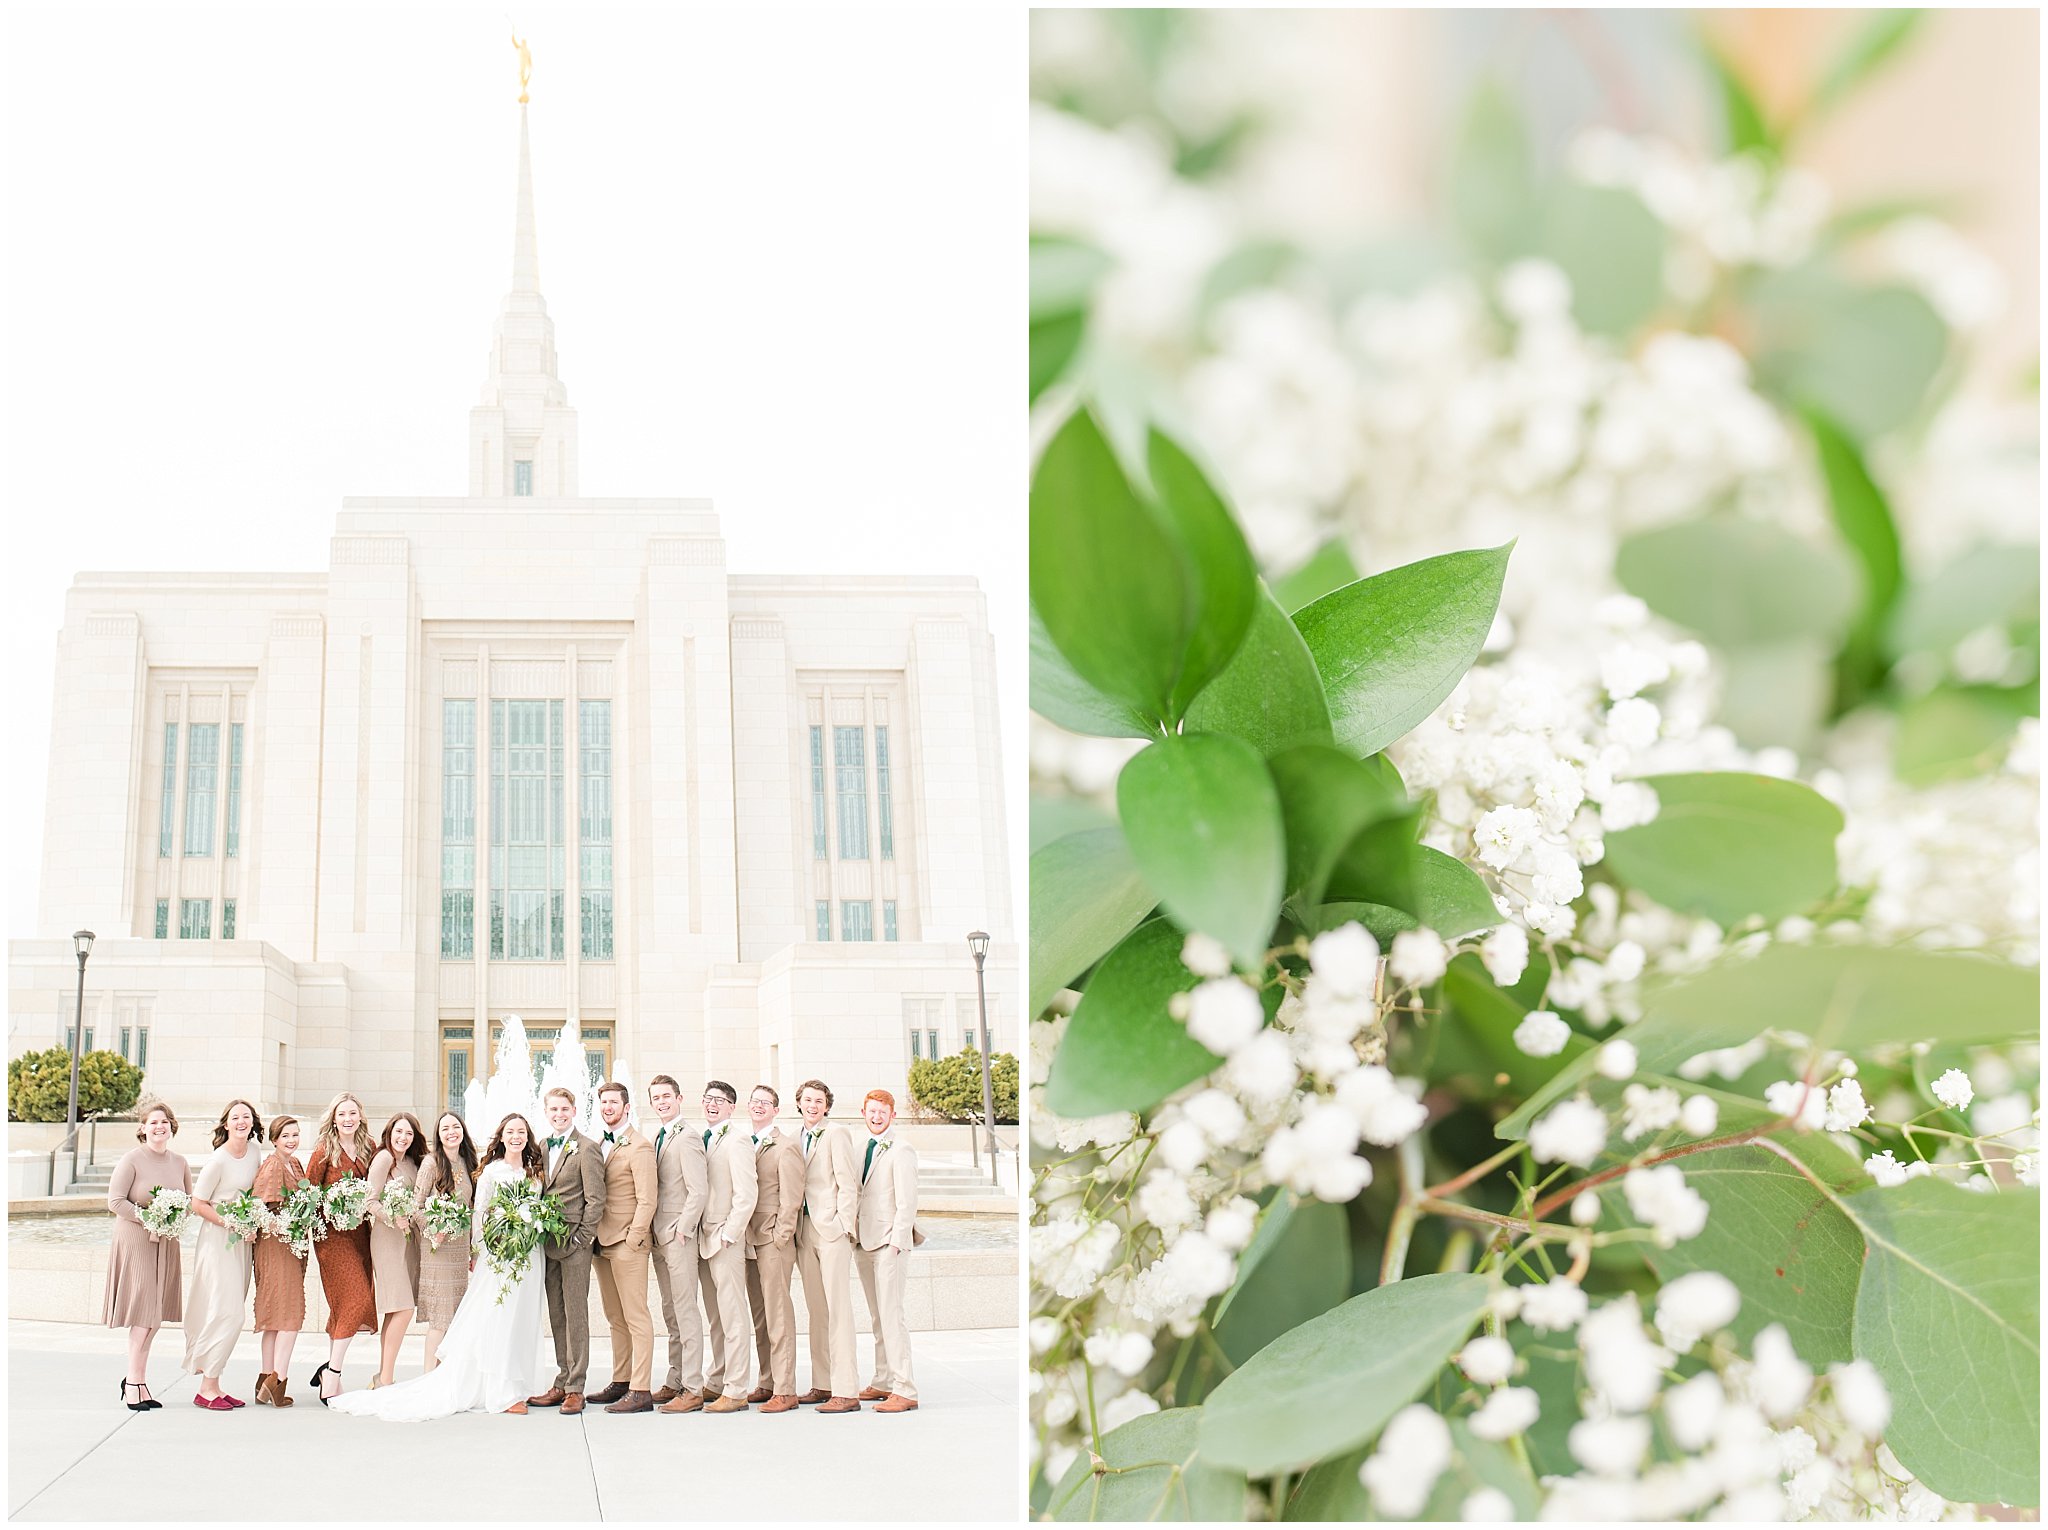 Bridal party portraits with green and white florals during Ogden Temple winter wedding | Brown, Emerald Green, and white wedding | Ogden Temple and Sweet Magnolia Wedding | Jessie and Dallin Photography